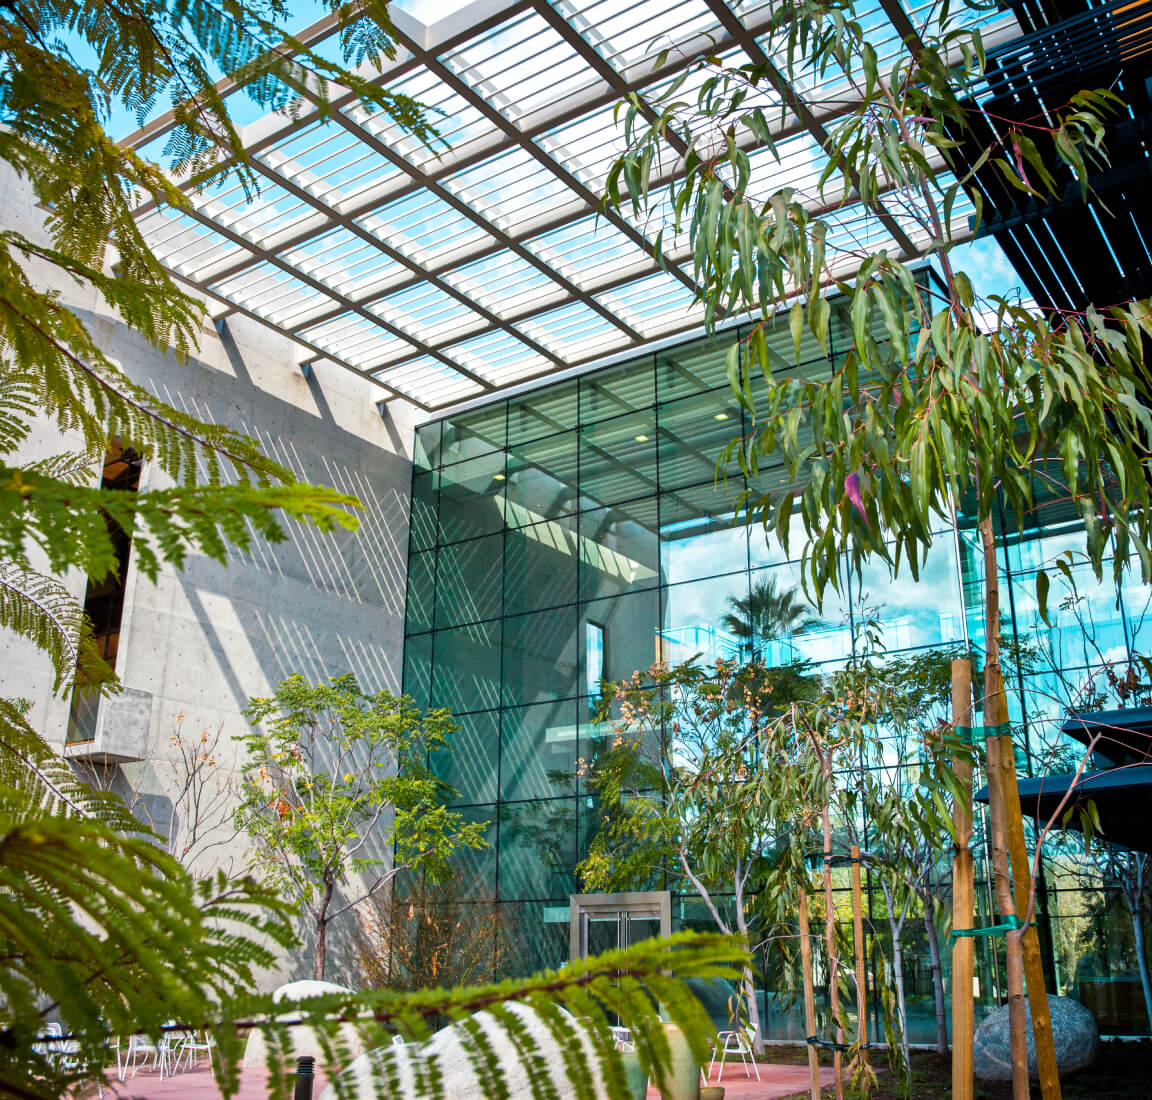 A shady patio beside a modern concrete and glass office building filled with bright green trees